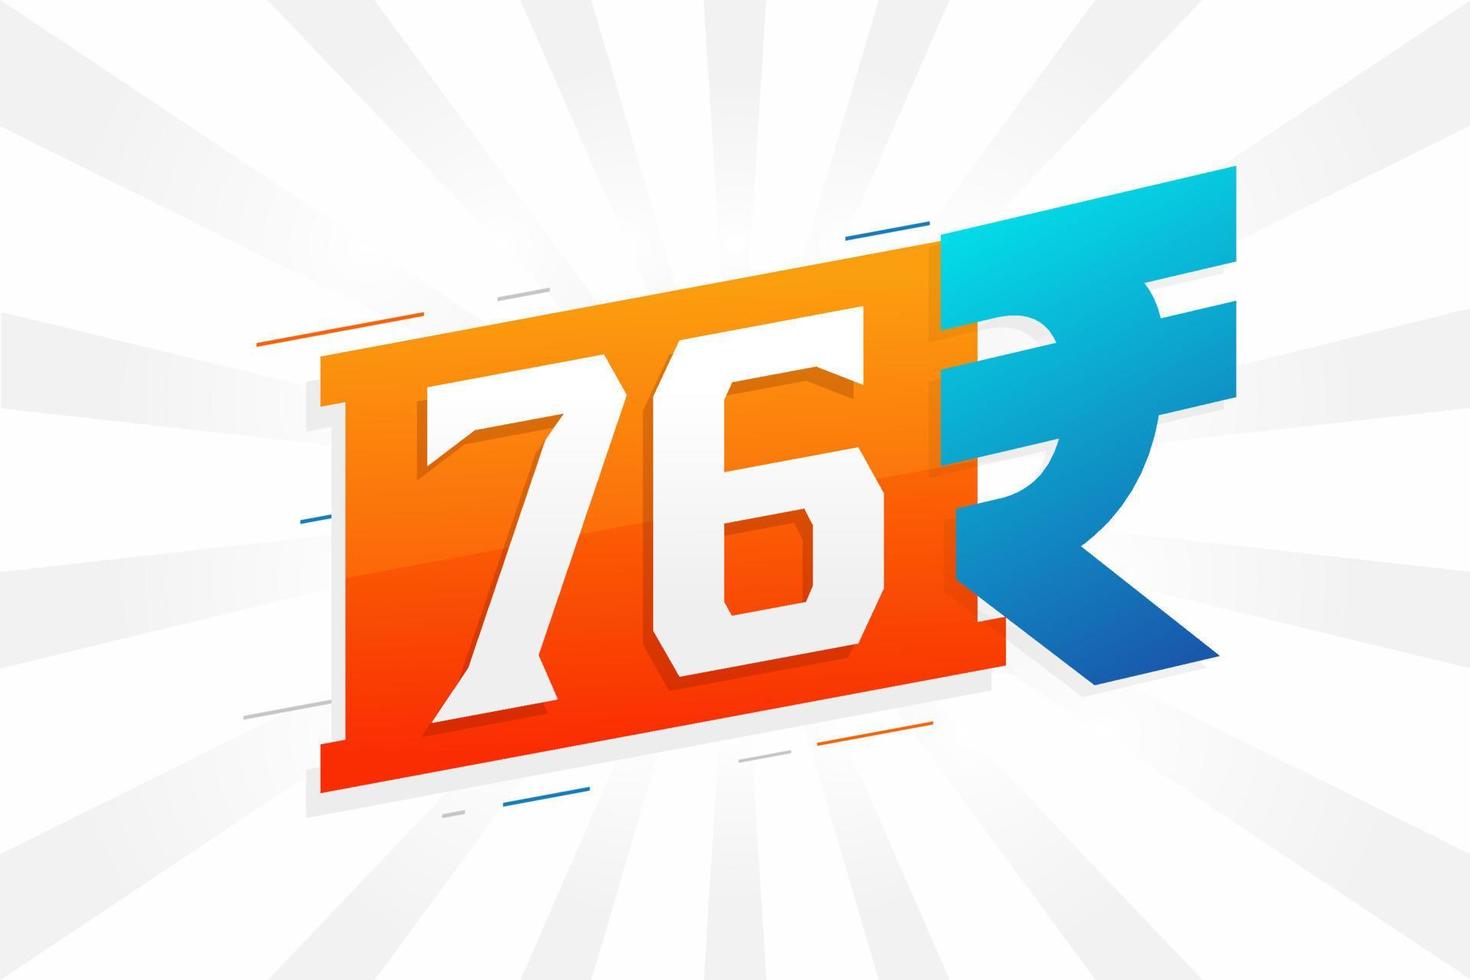 76 Rupee symbol bold text vector image. 76 Indian Rupee currency sign vector illustration